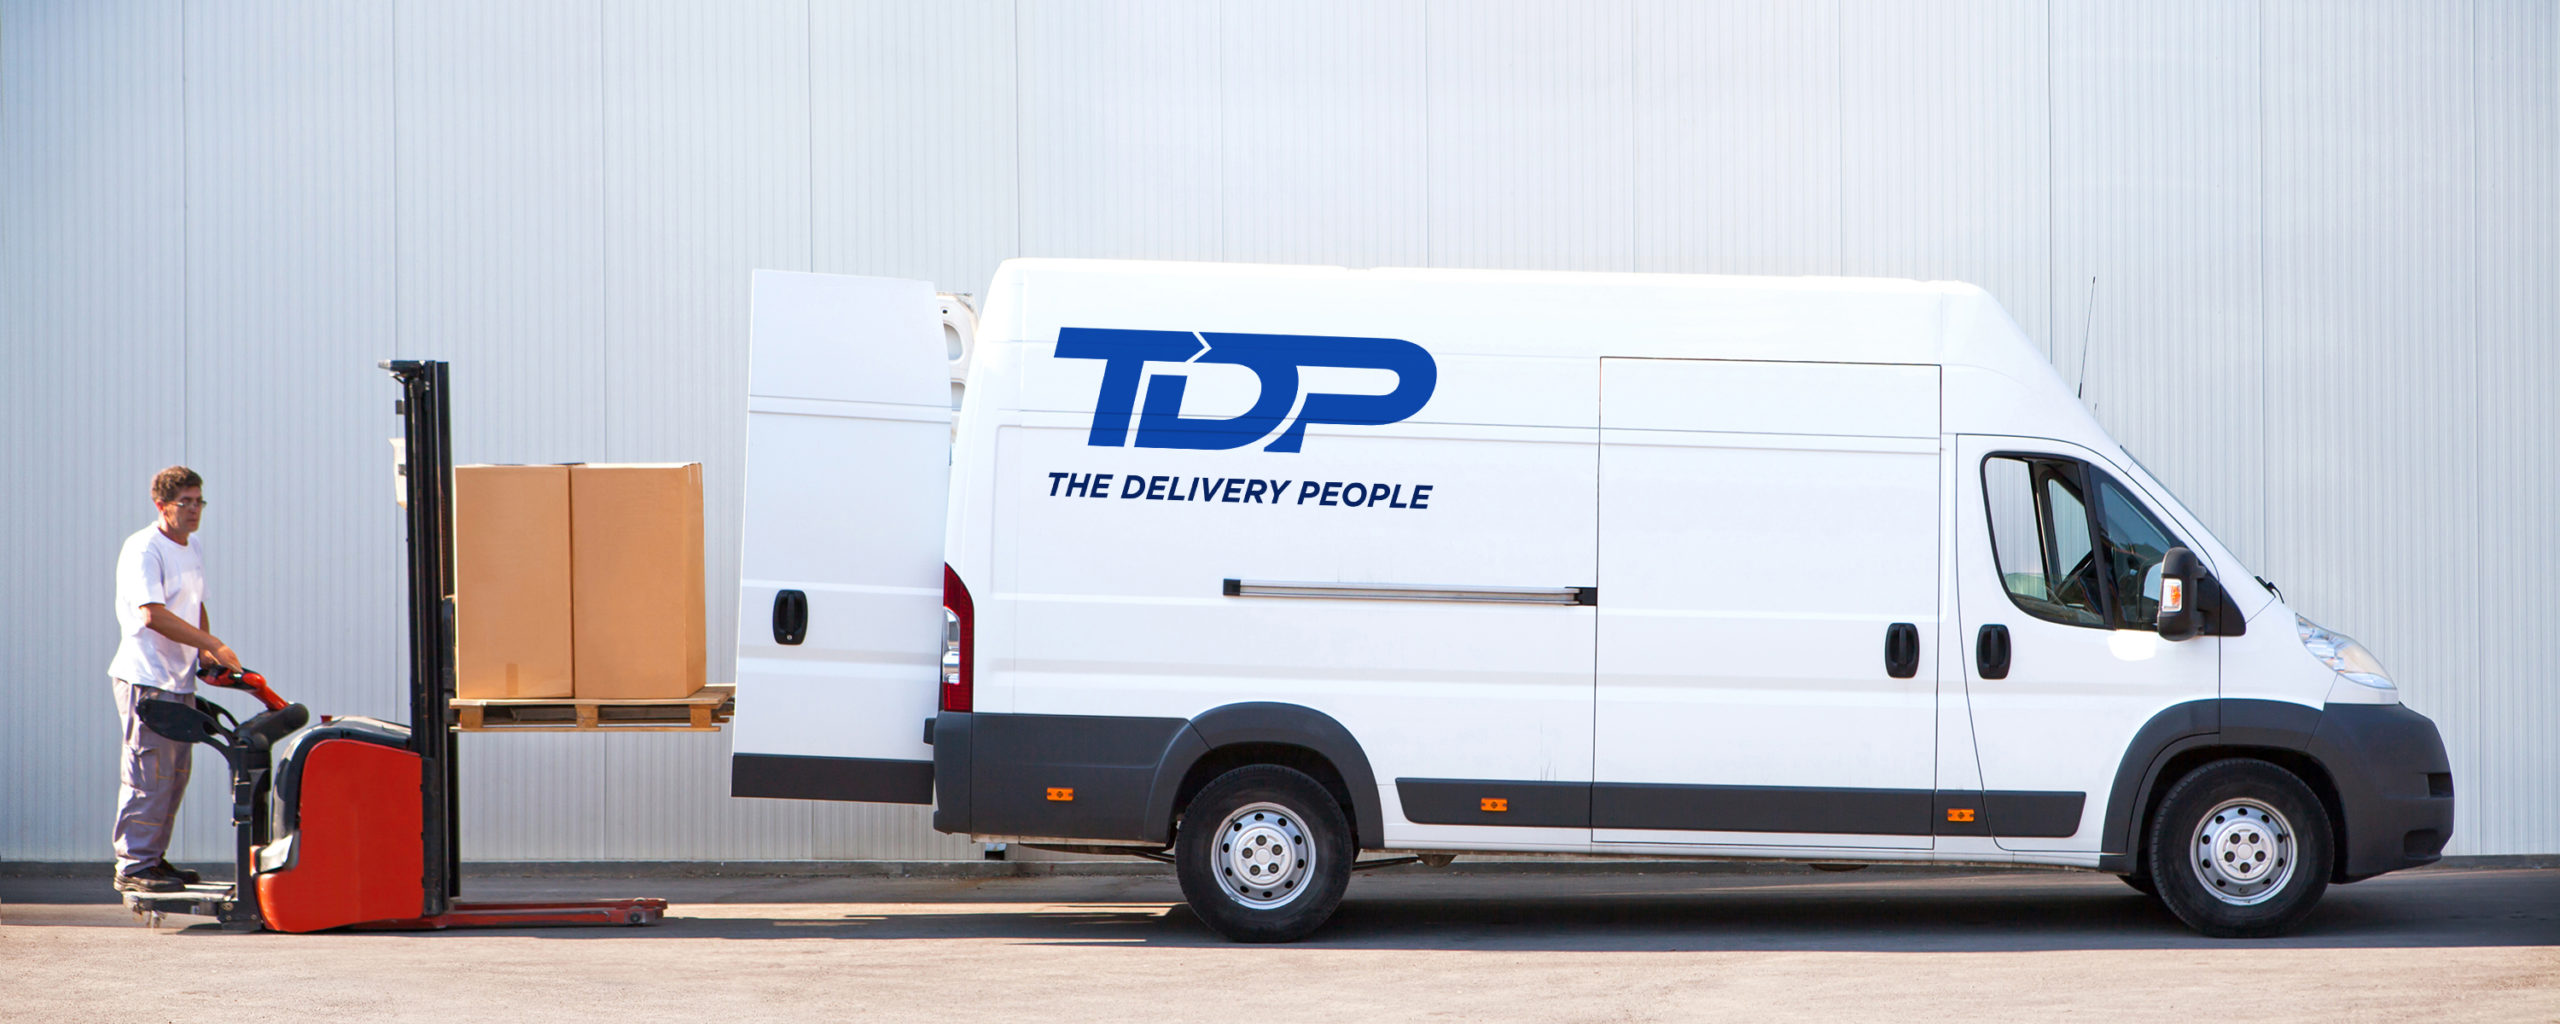 TDP Courier Is Loading The Van With Parcels